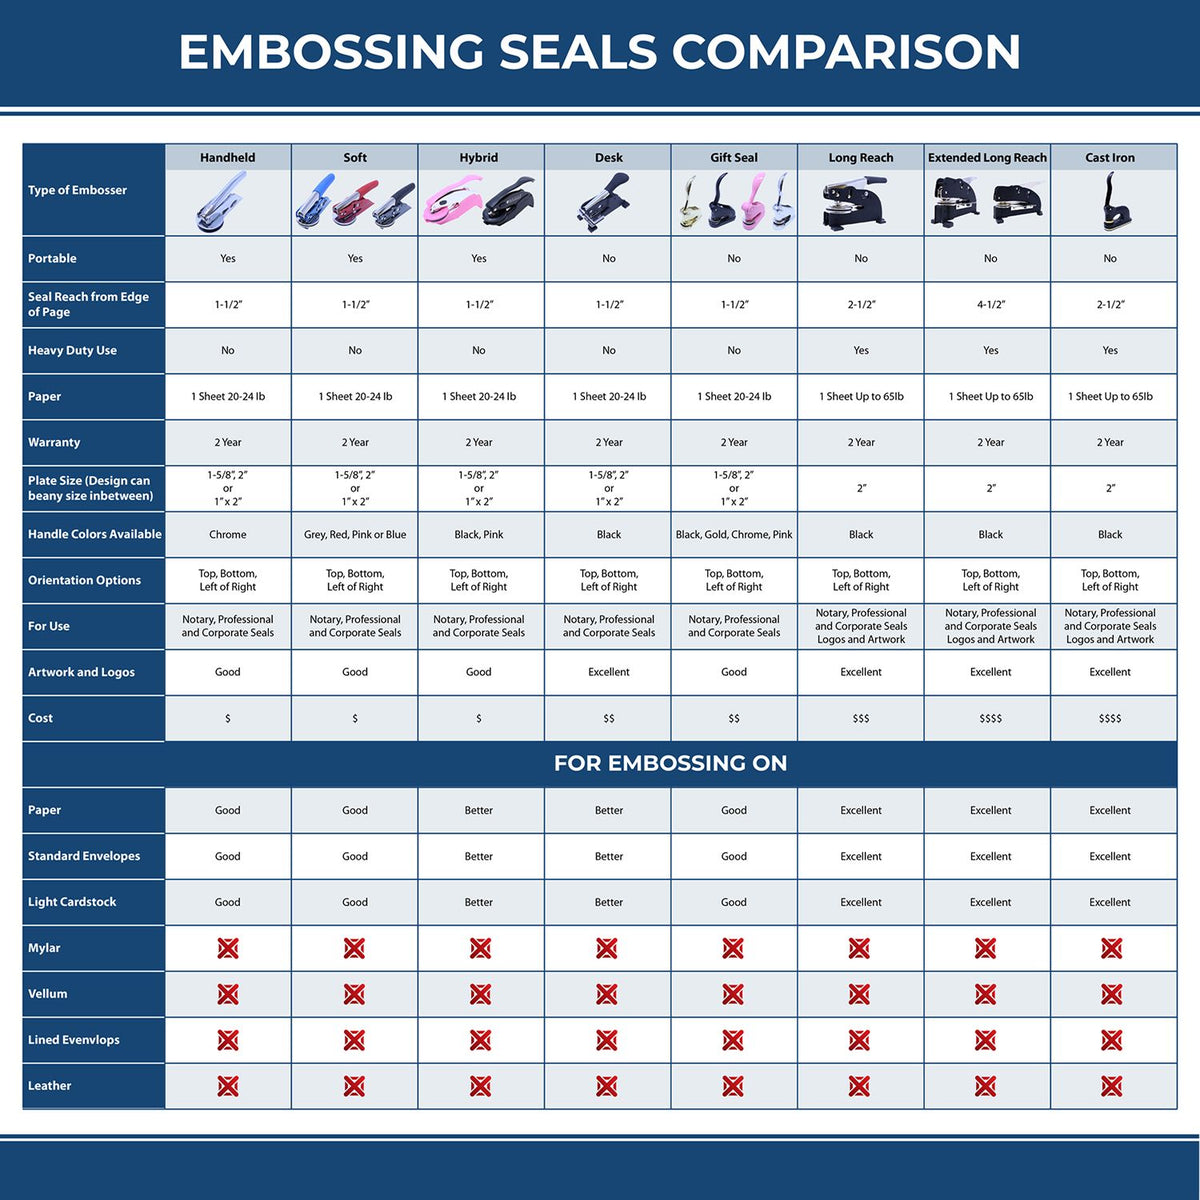 A comparison chart for the different types of mount models available for the Heavy Duty Cast Iron Massachusetts Geologist Seal Embosser